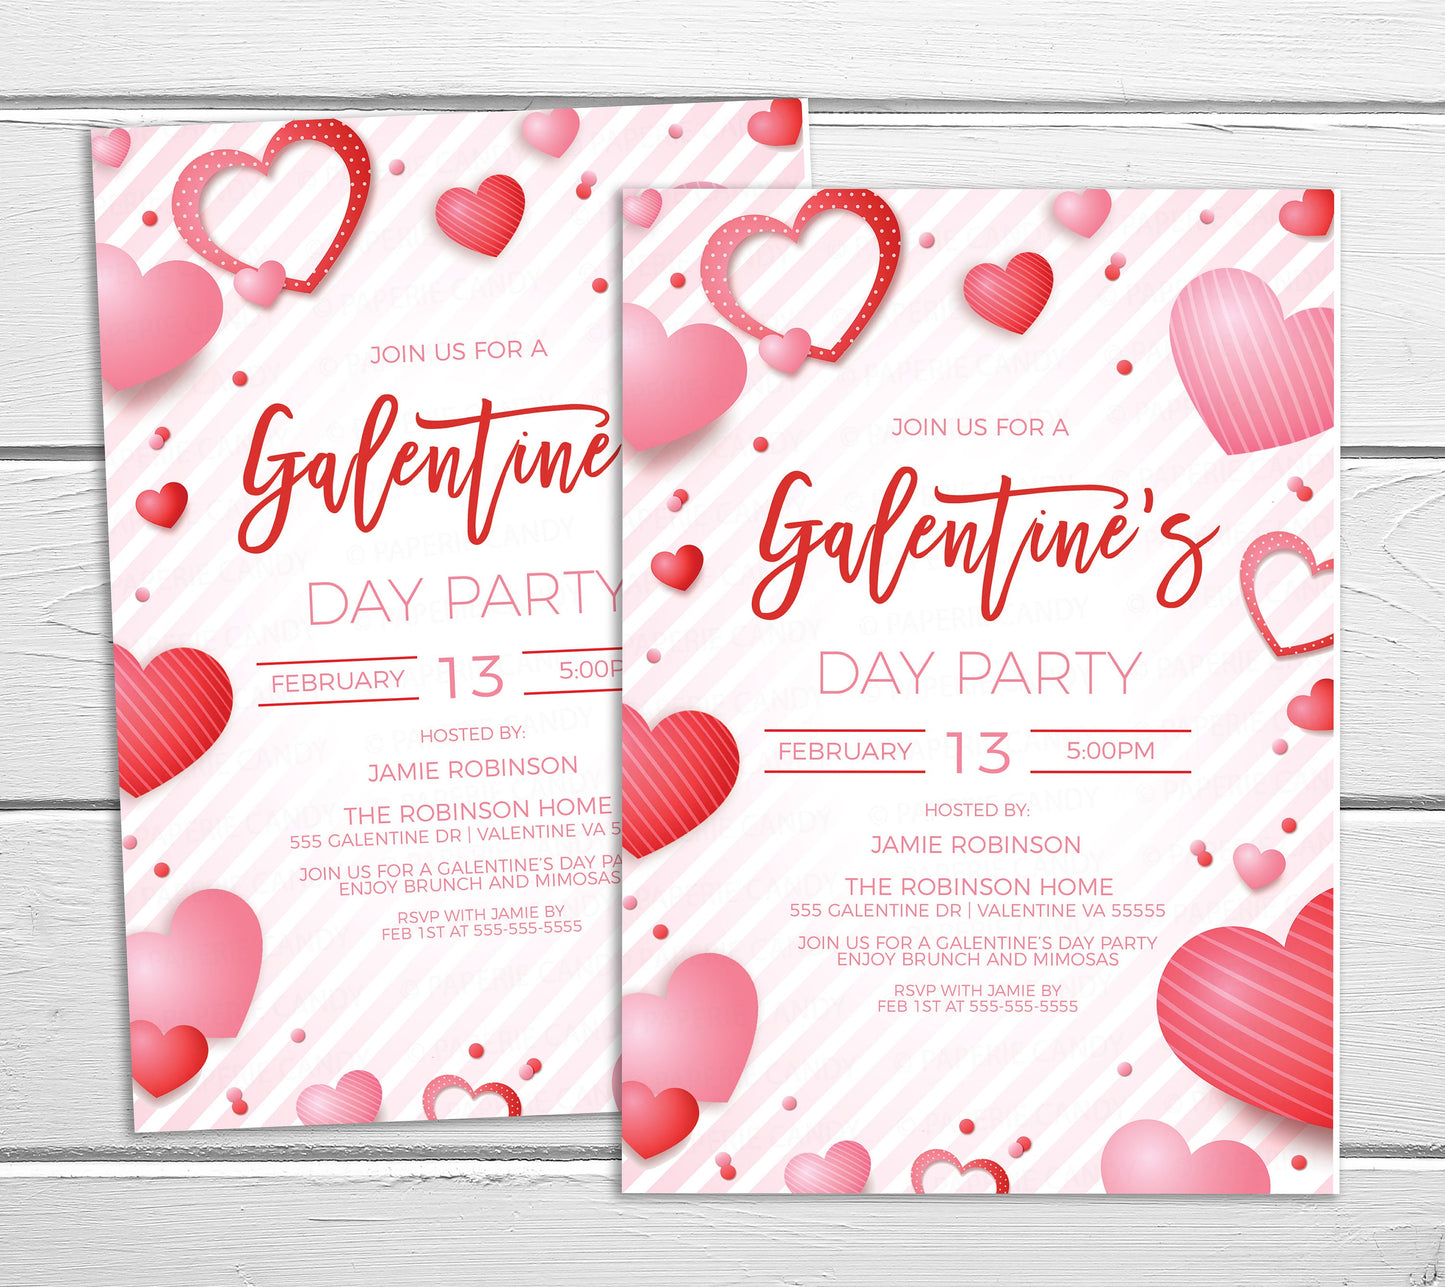 Galentine's Day Party Invitation, Editable Galentine's Invite, Galentine Breakfast Brunch Lunch Dinner Cocktail Party, Friends Valentine's